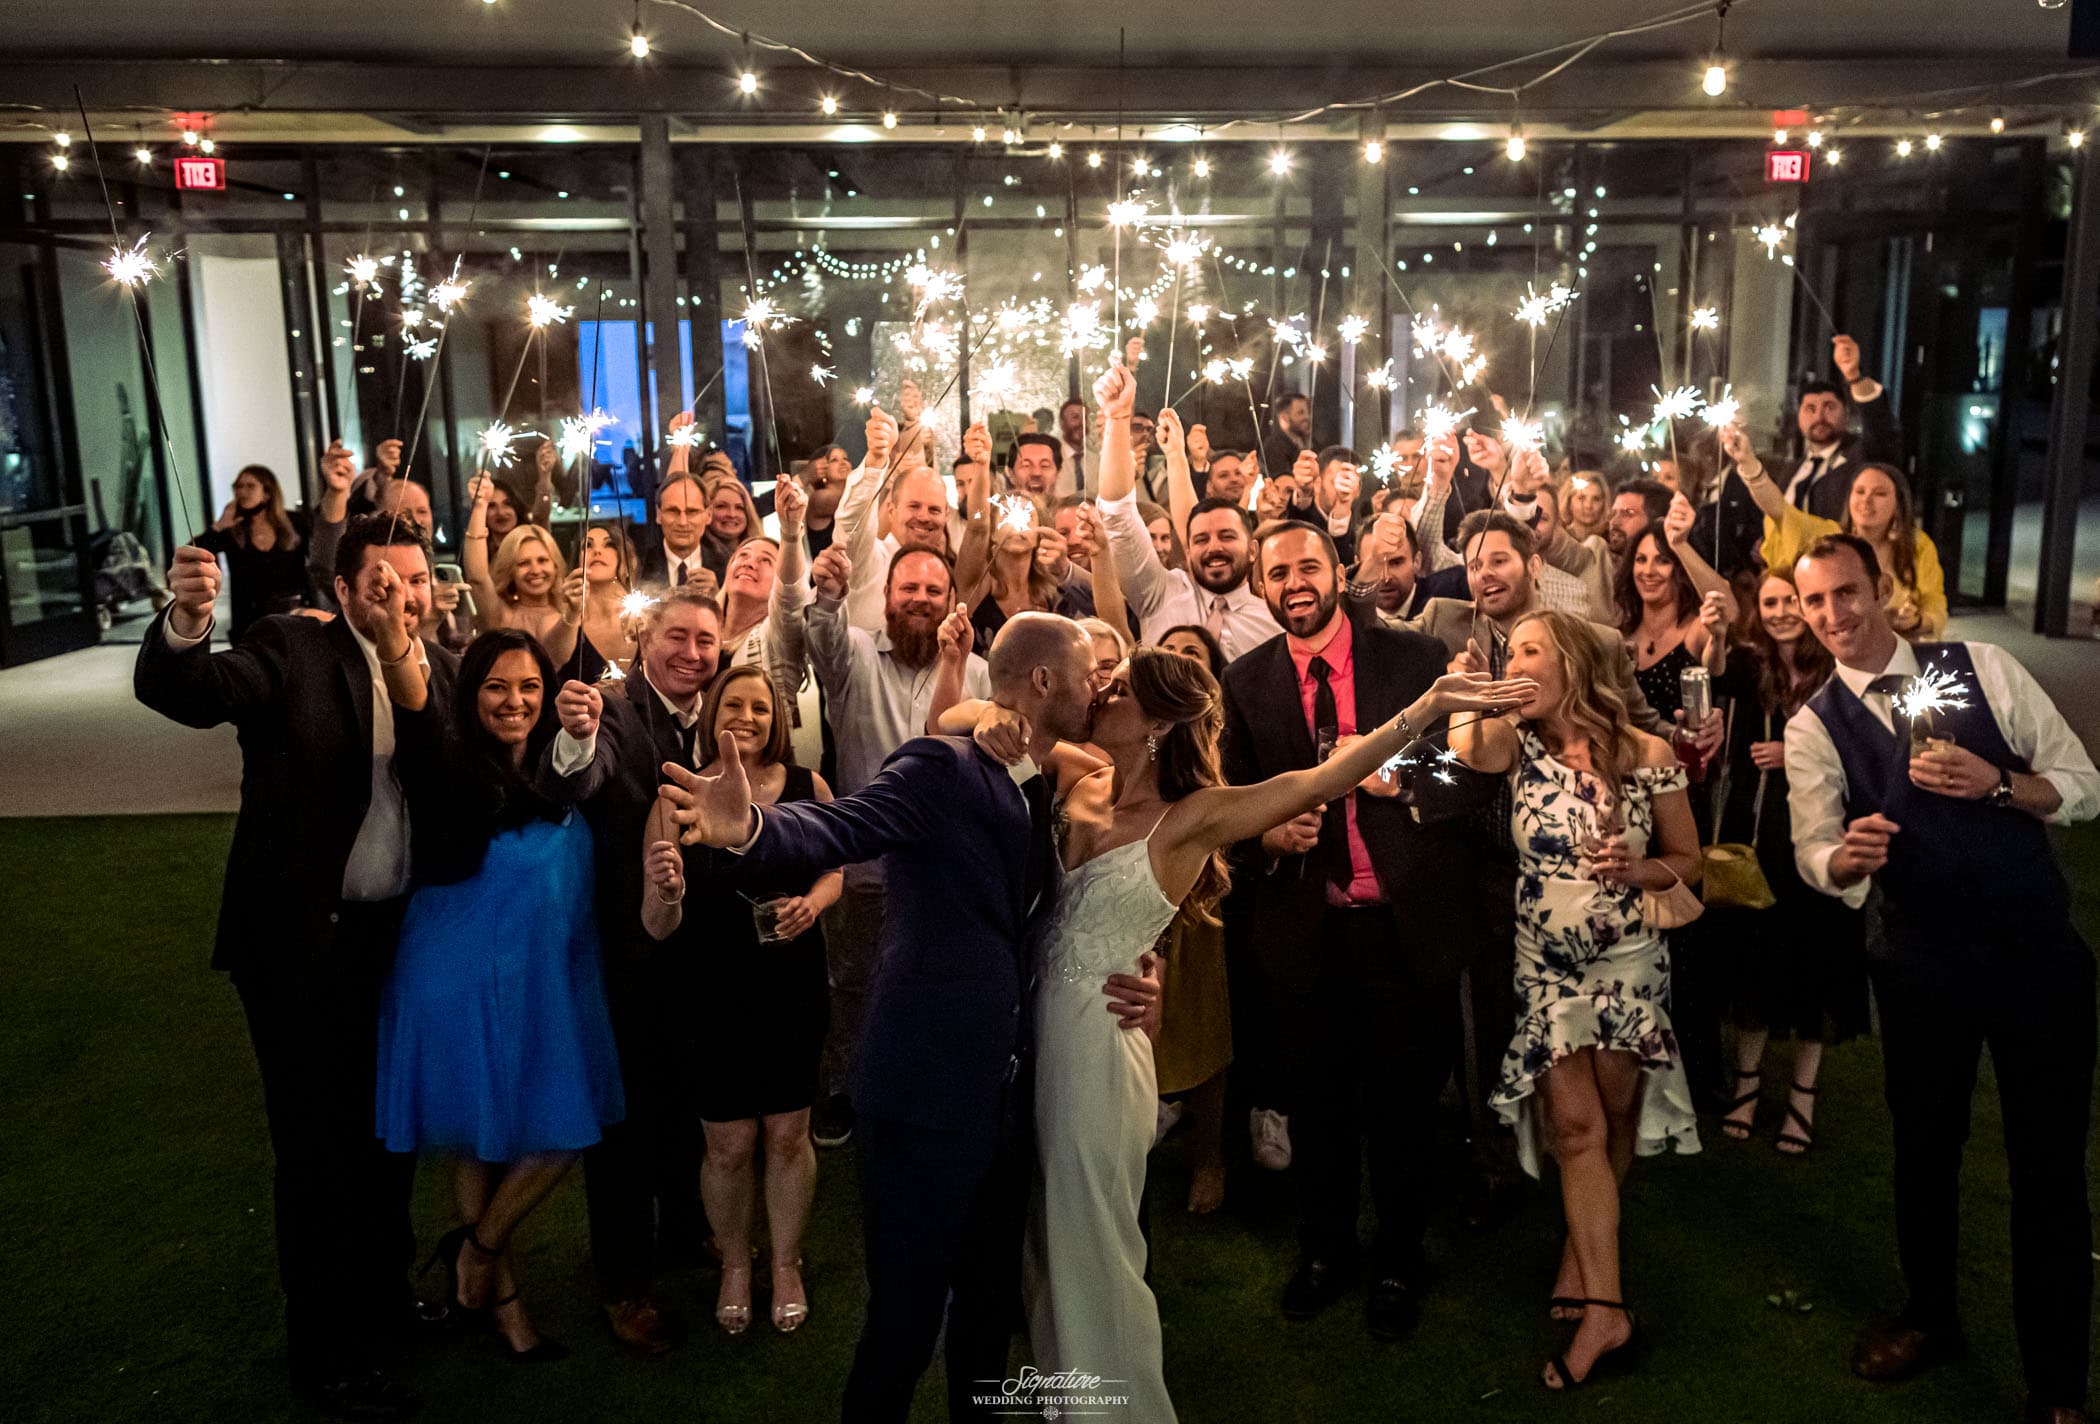 Bride and groom kiss in front of wedding guests with sparkers group shot